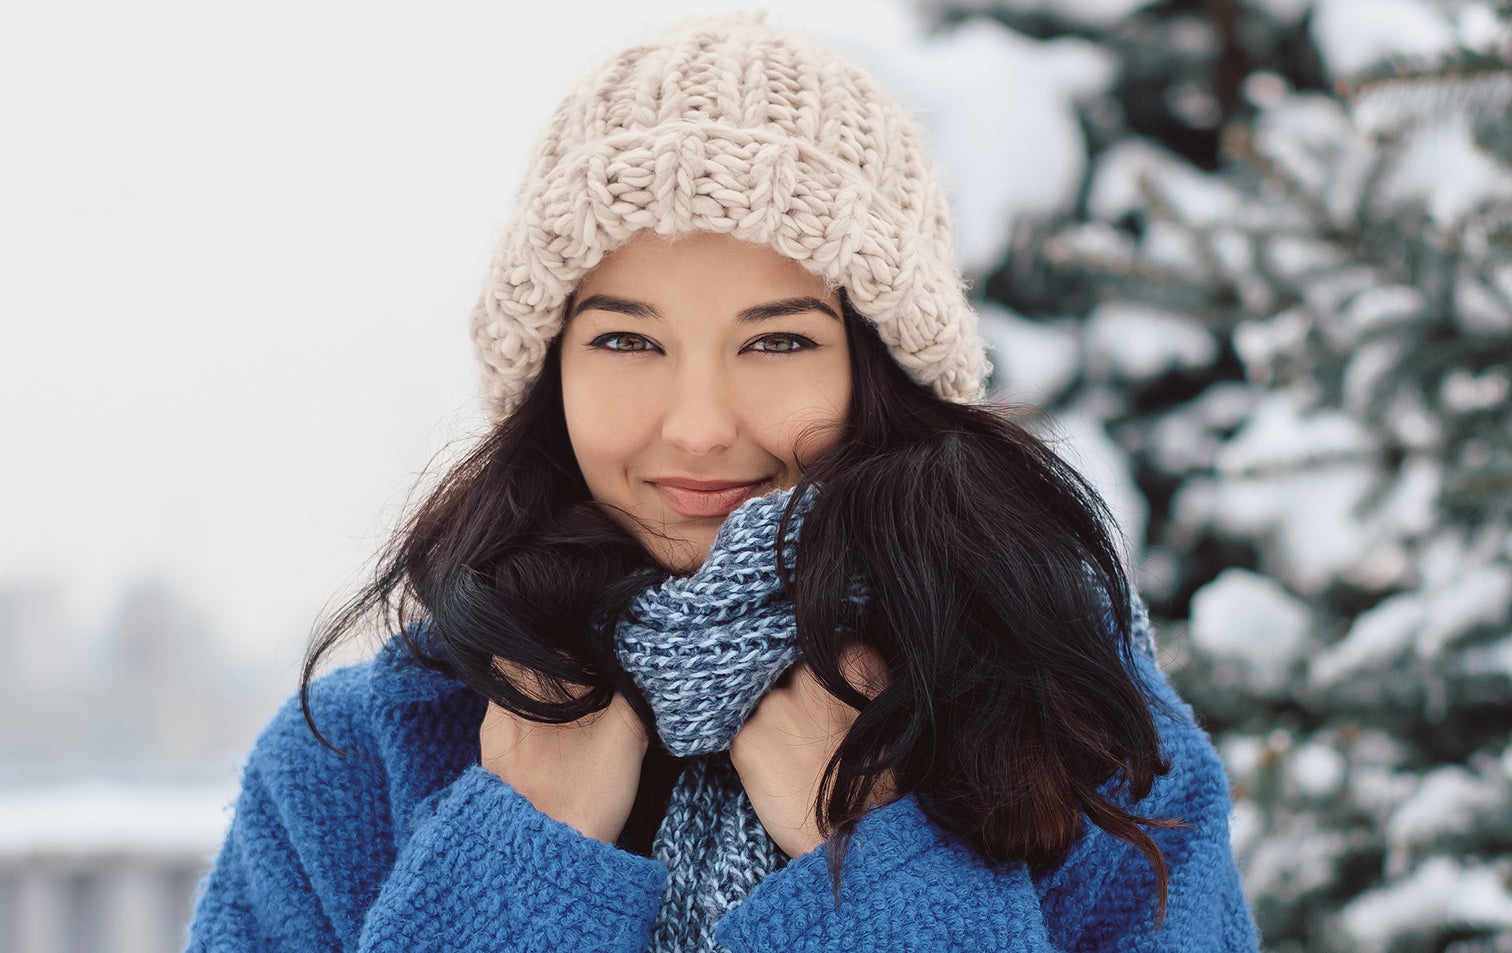 10 Expert Winter Hair Care Tips to Protect Your Tresses